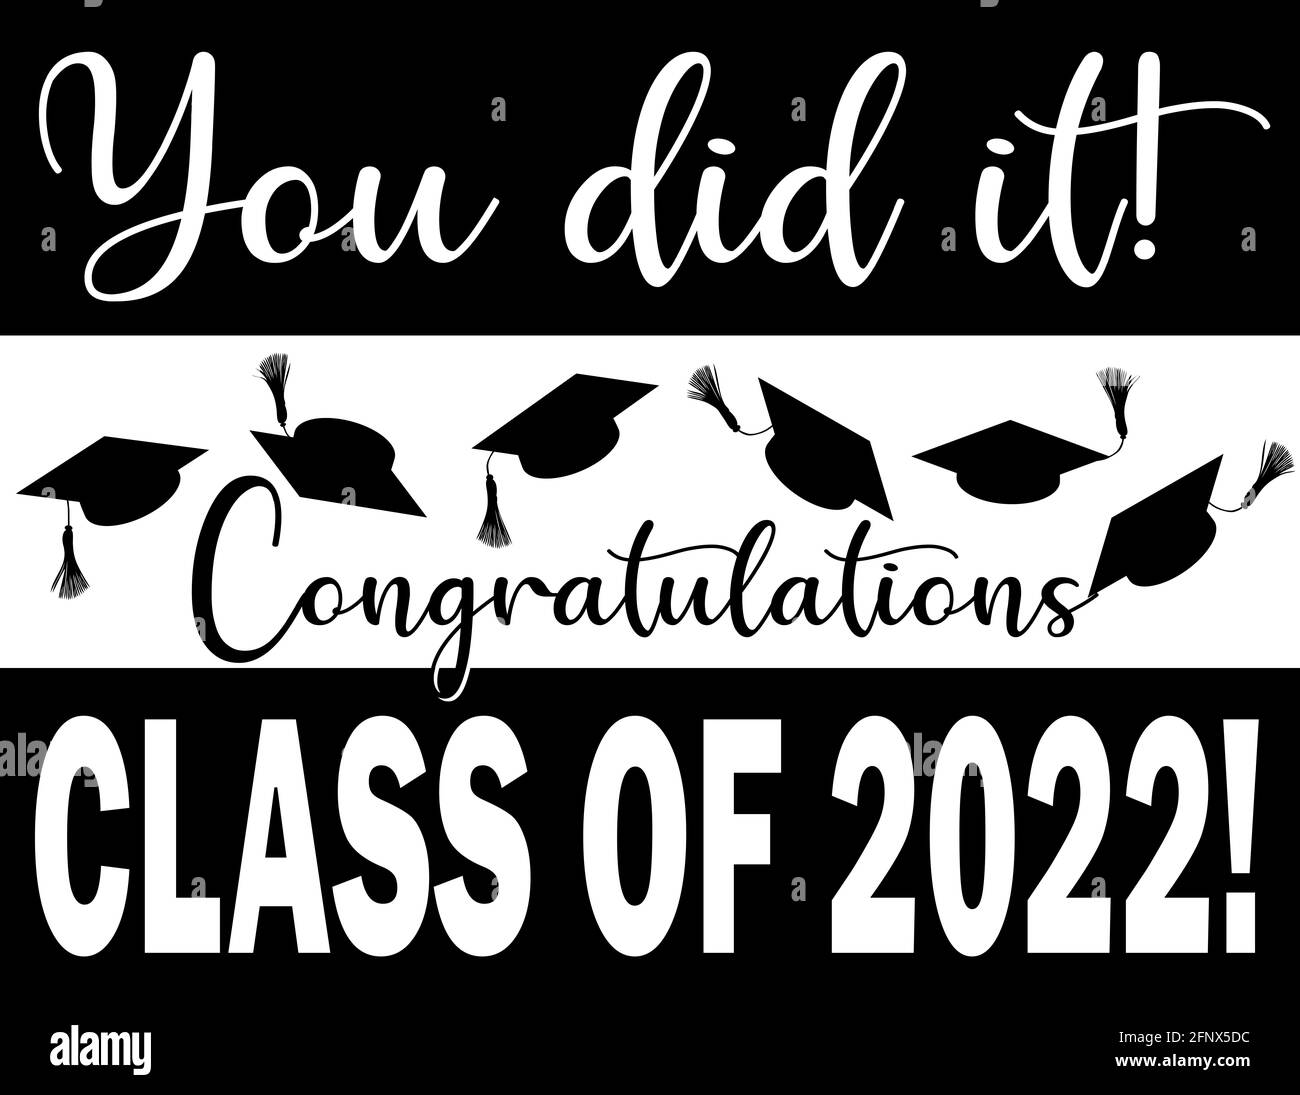 You did it Graphic Congratulations Class of 2022 Stock Photo